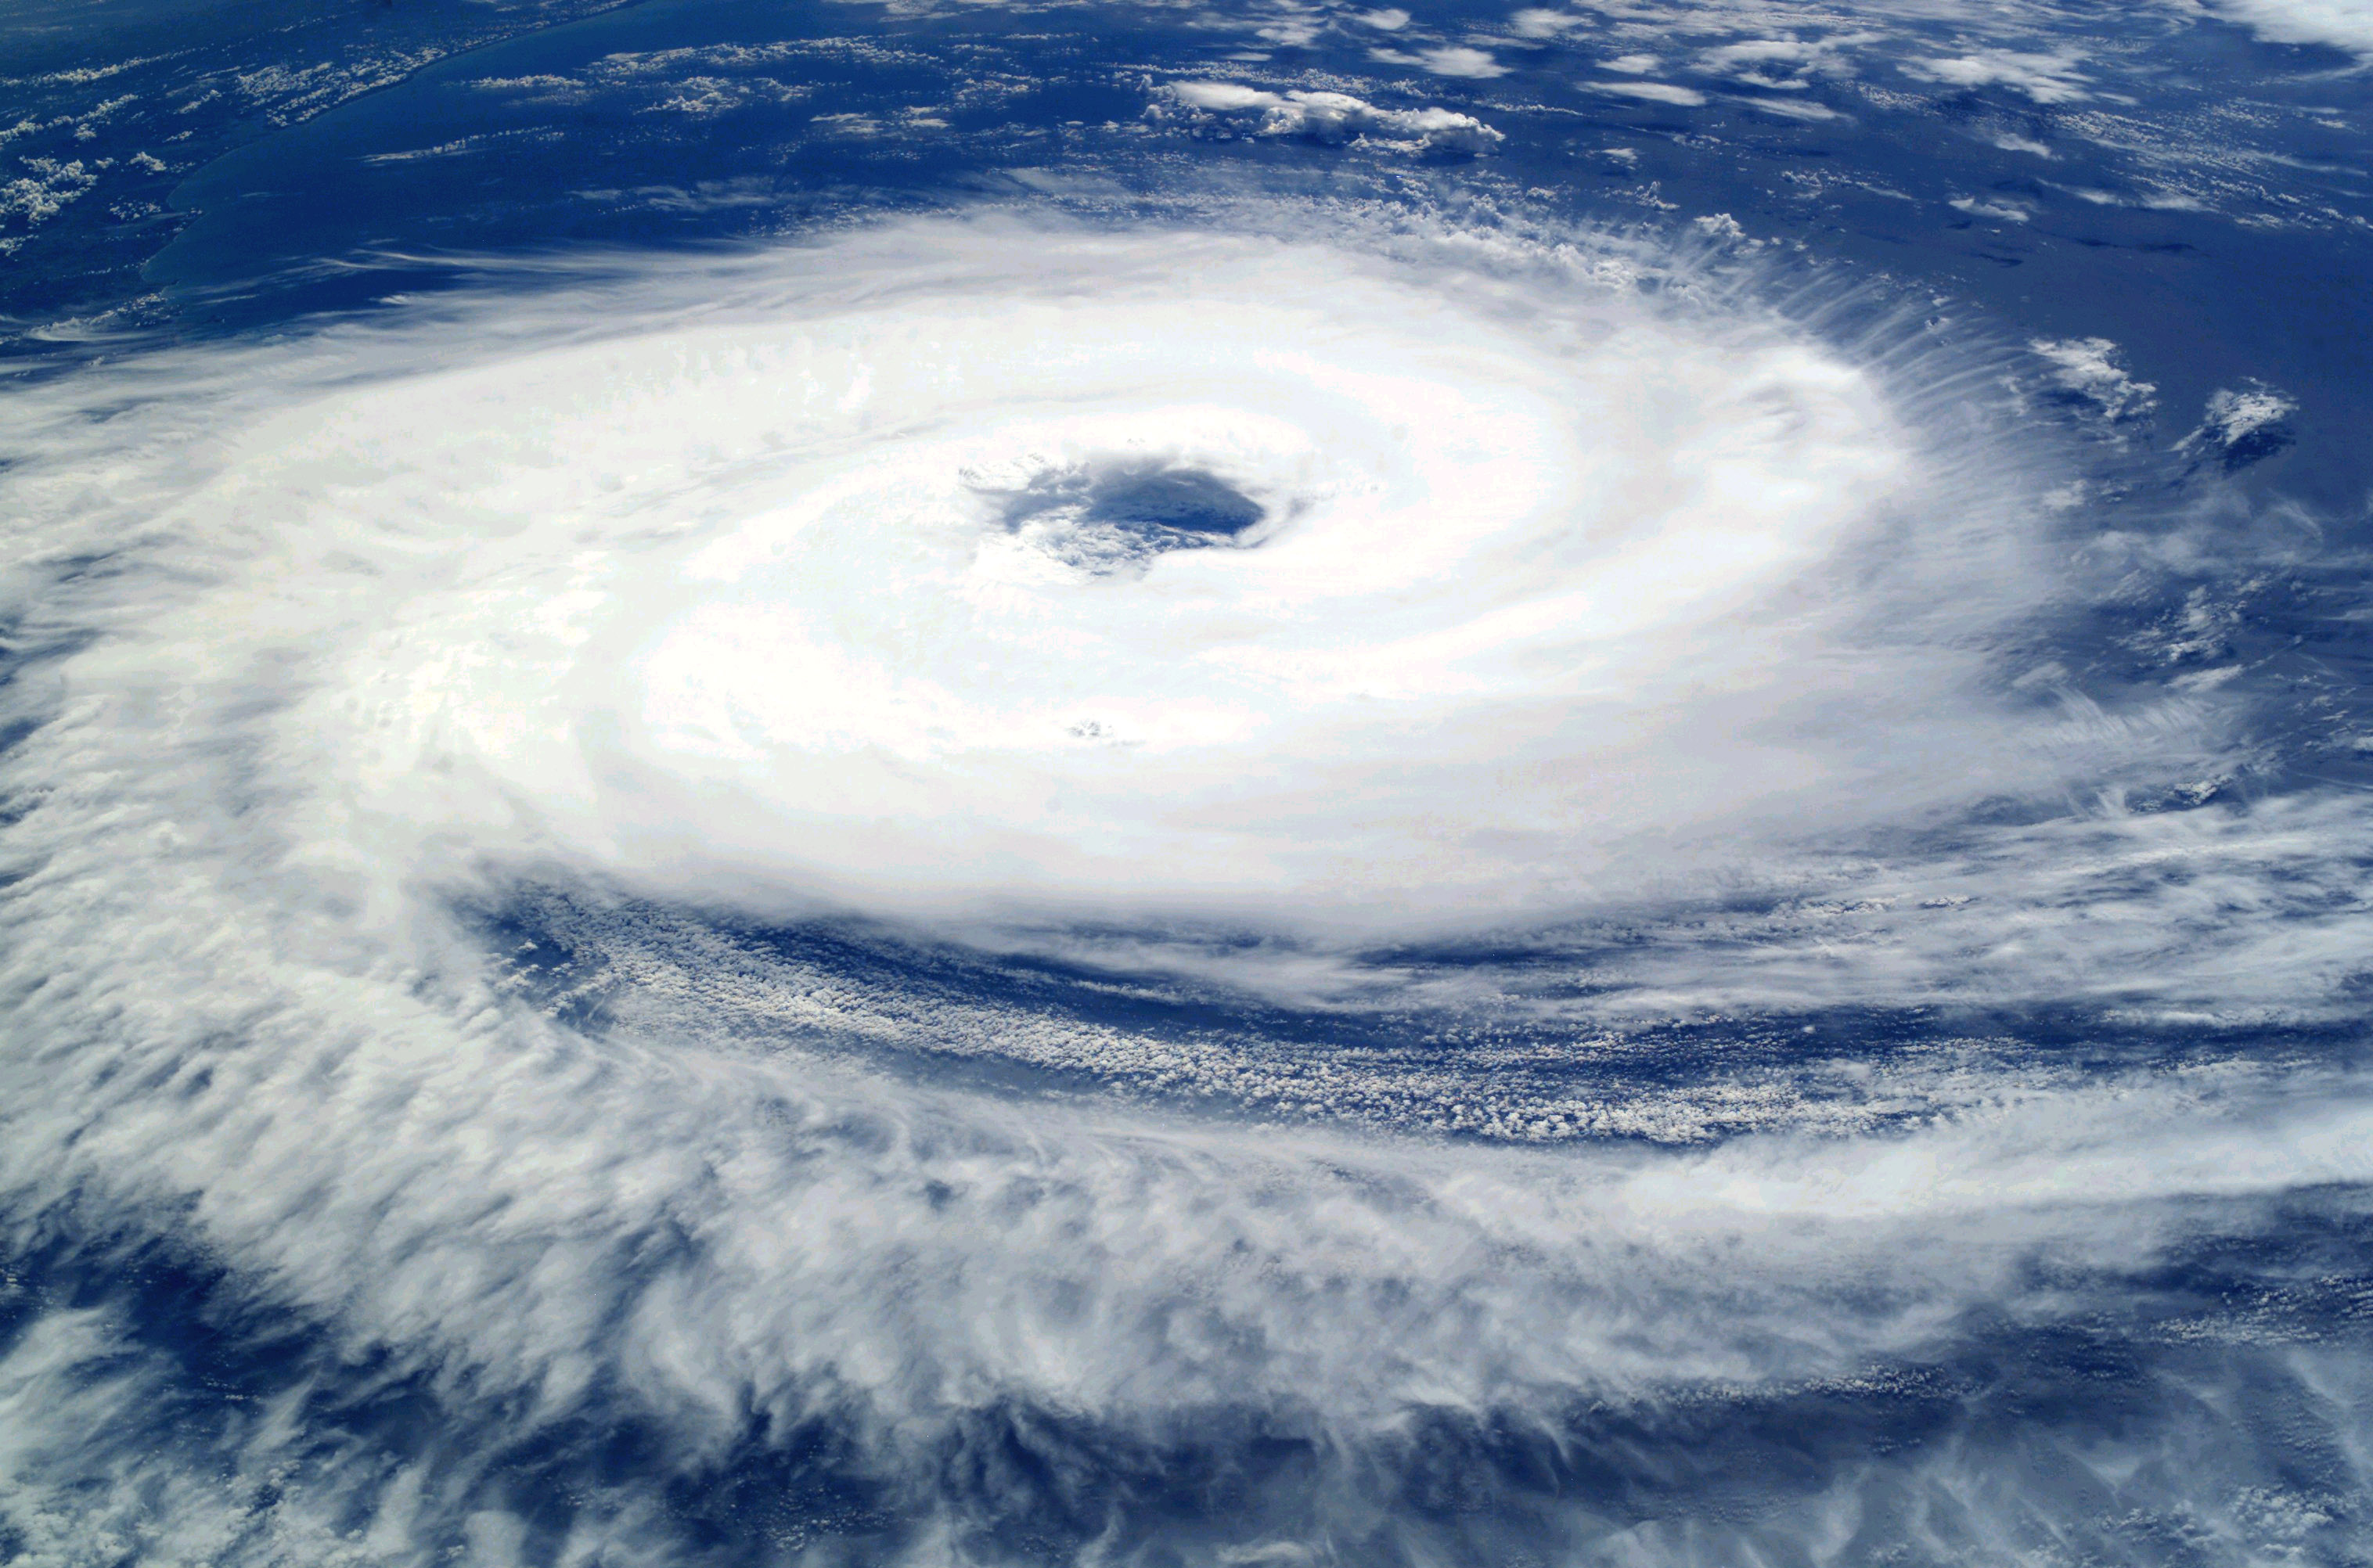 Cyclone Catarina from the ISS on March 26 2004